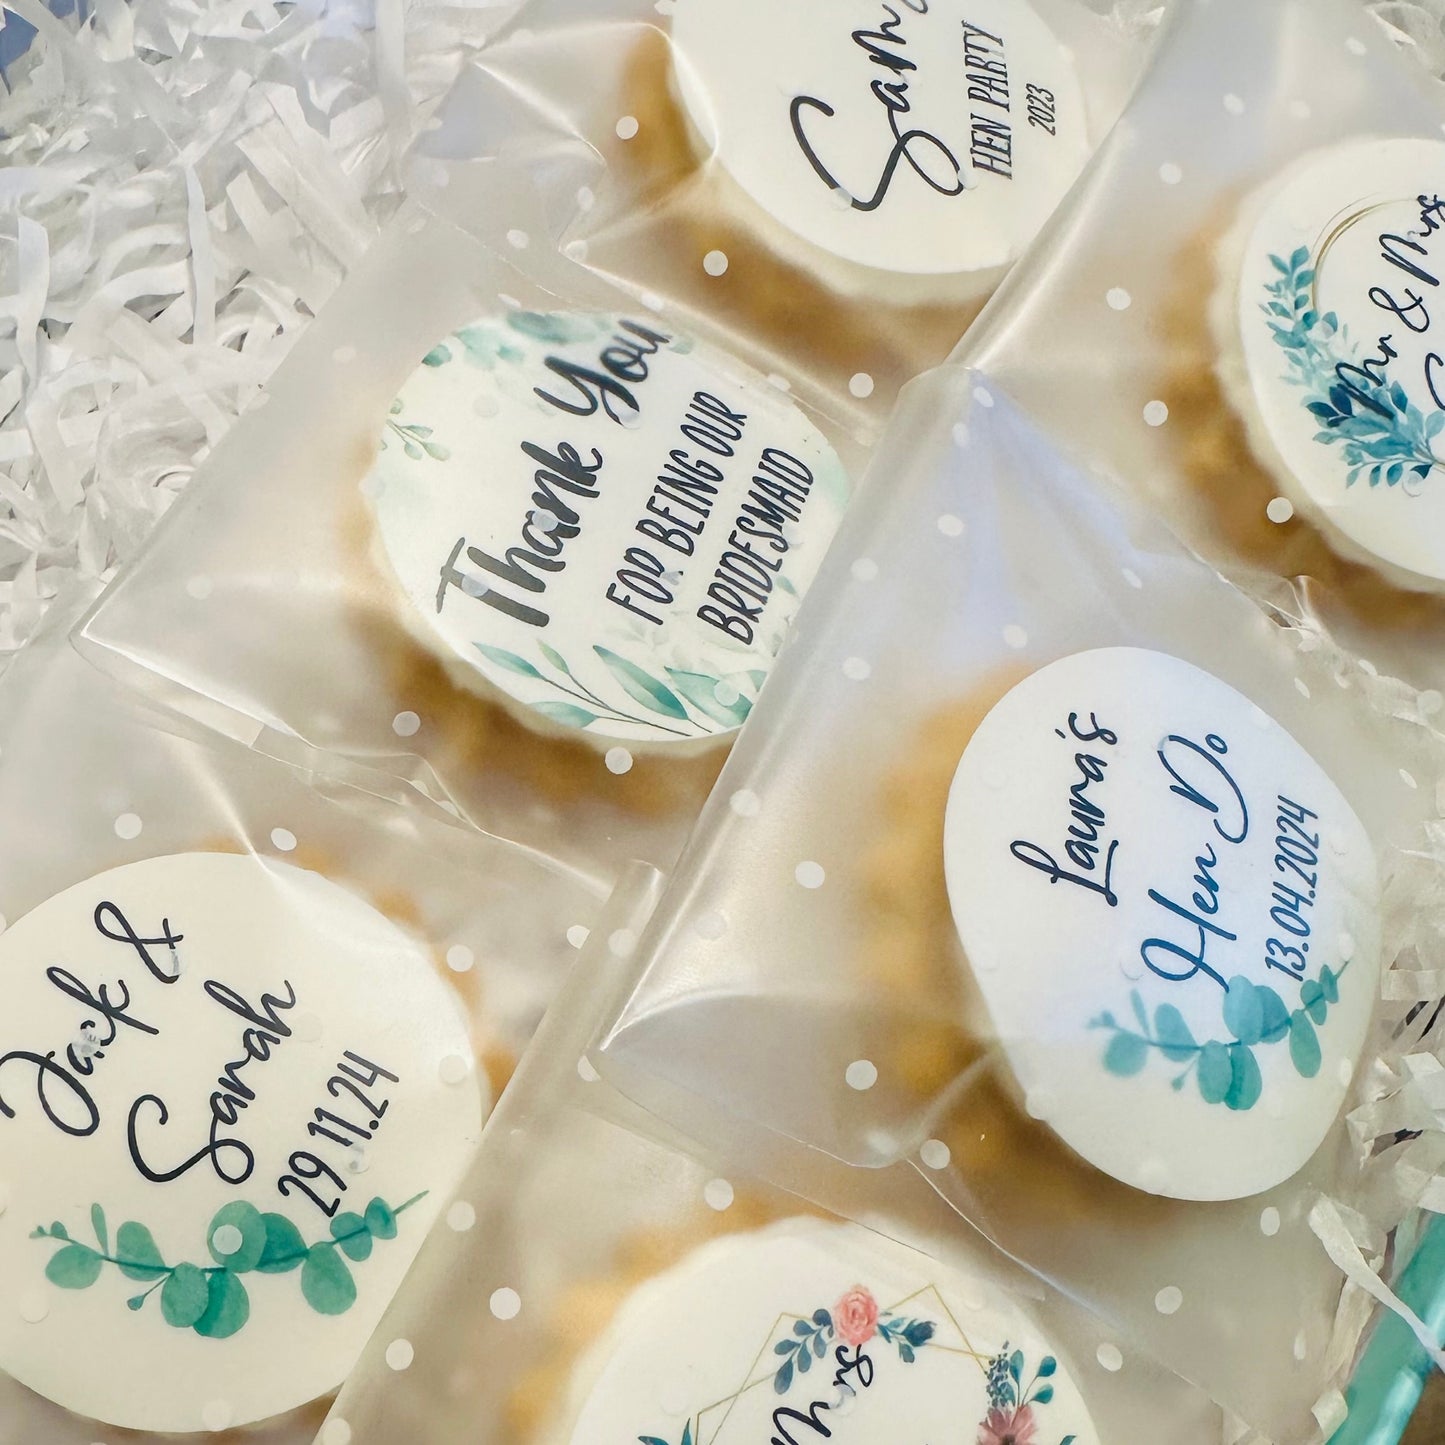 Personalised Bridal Party Proposal Biscuits